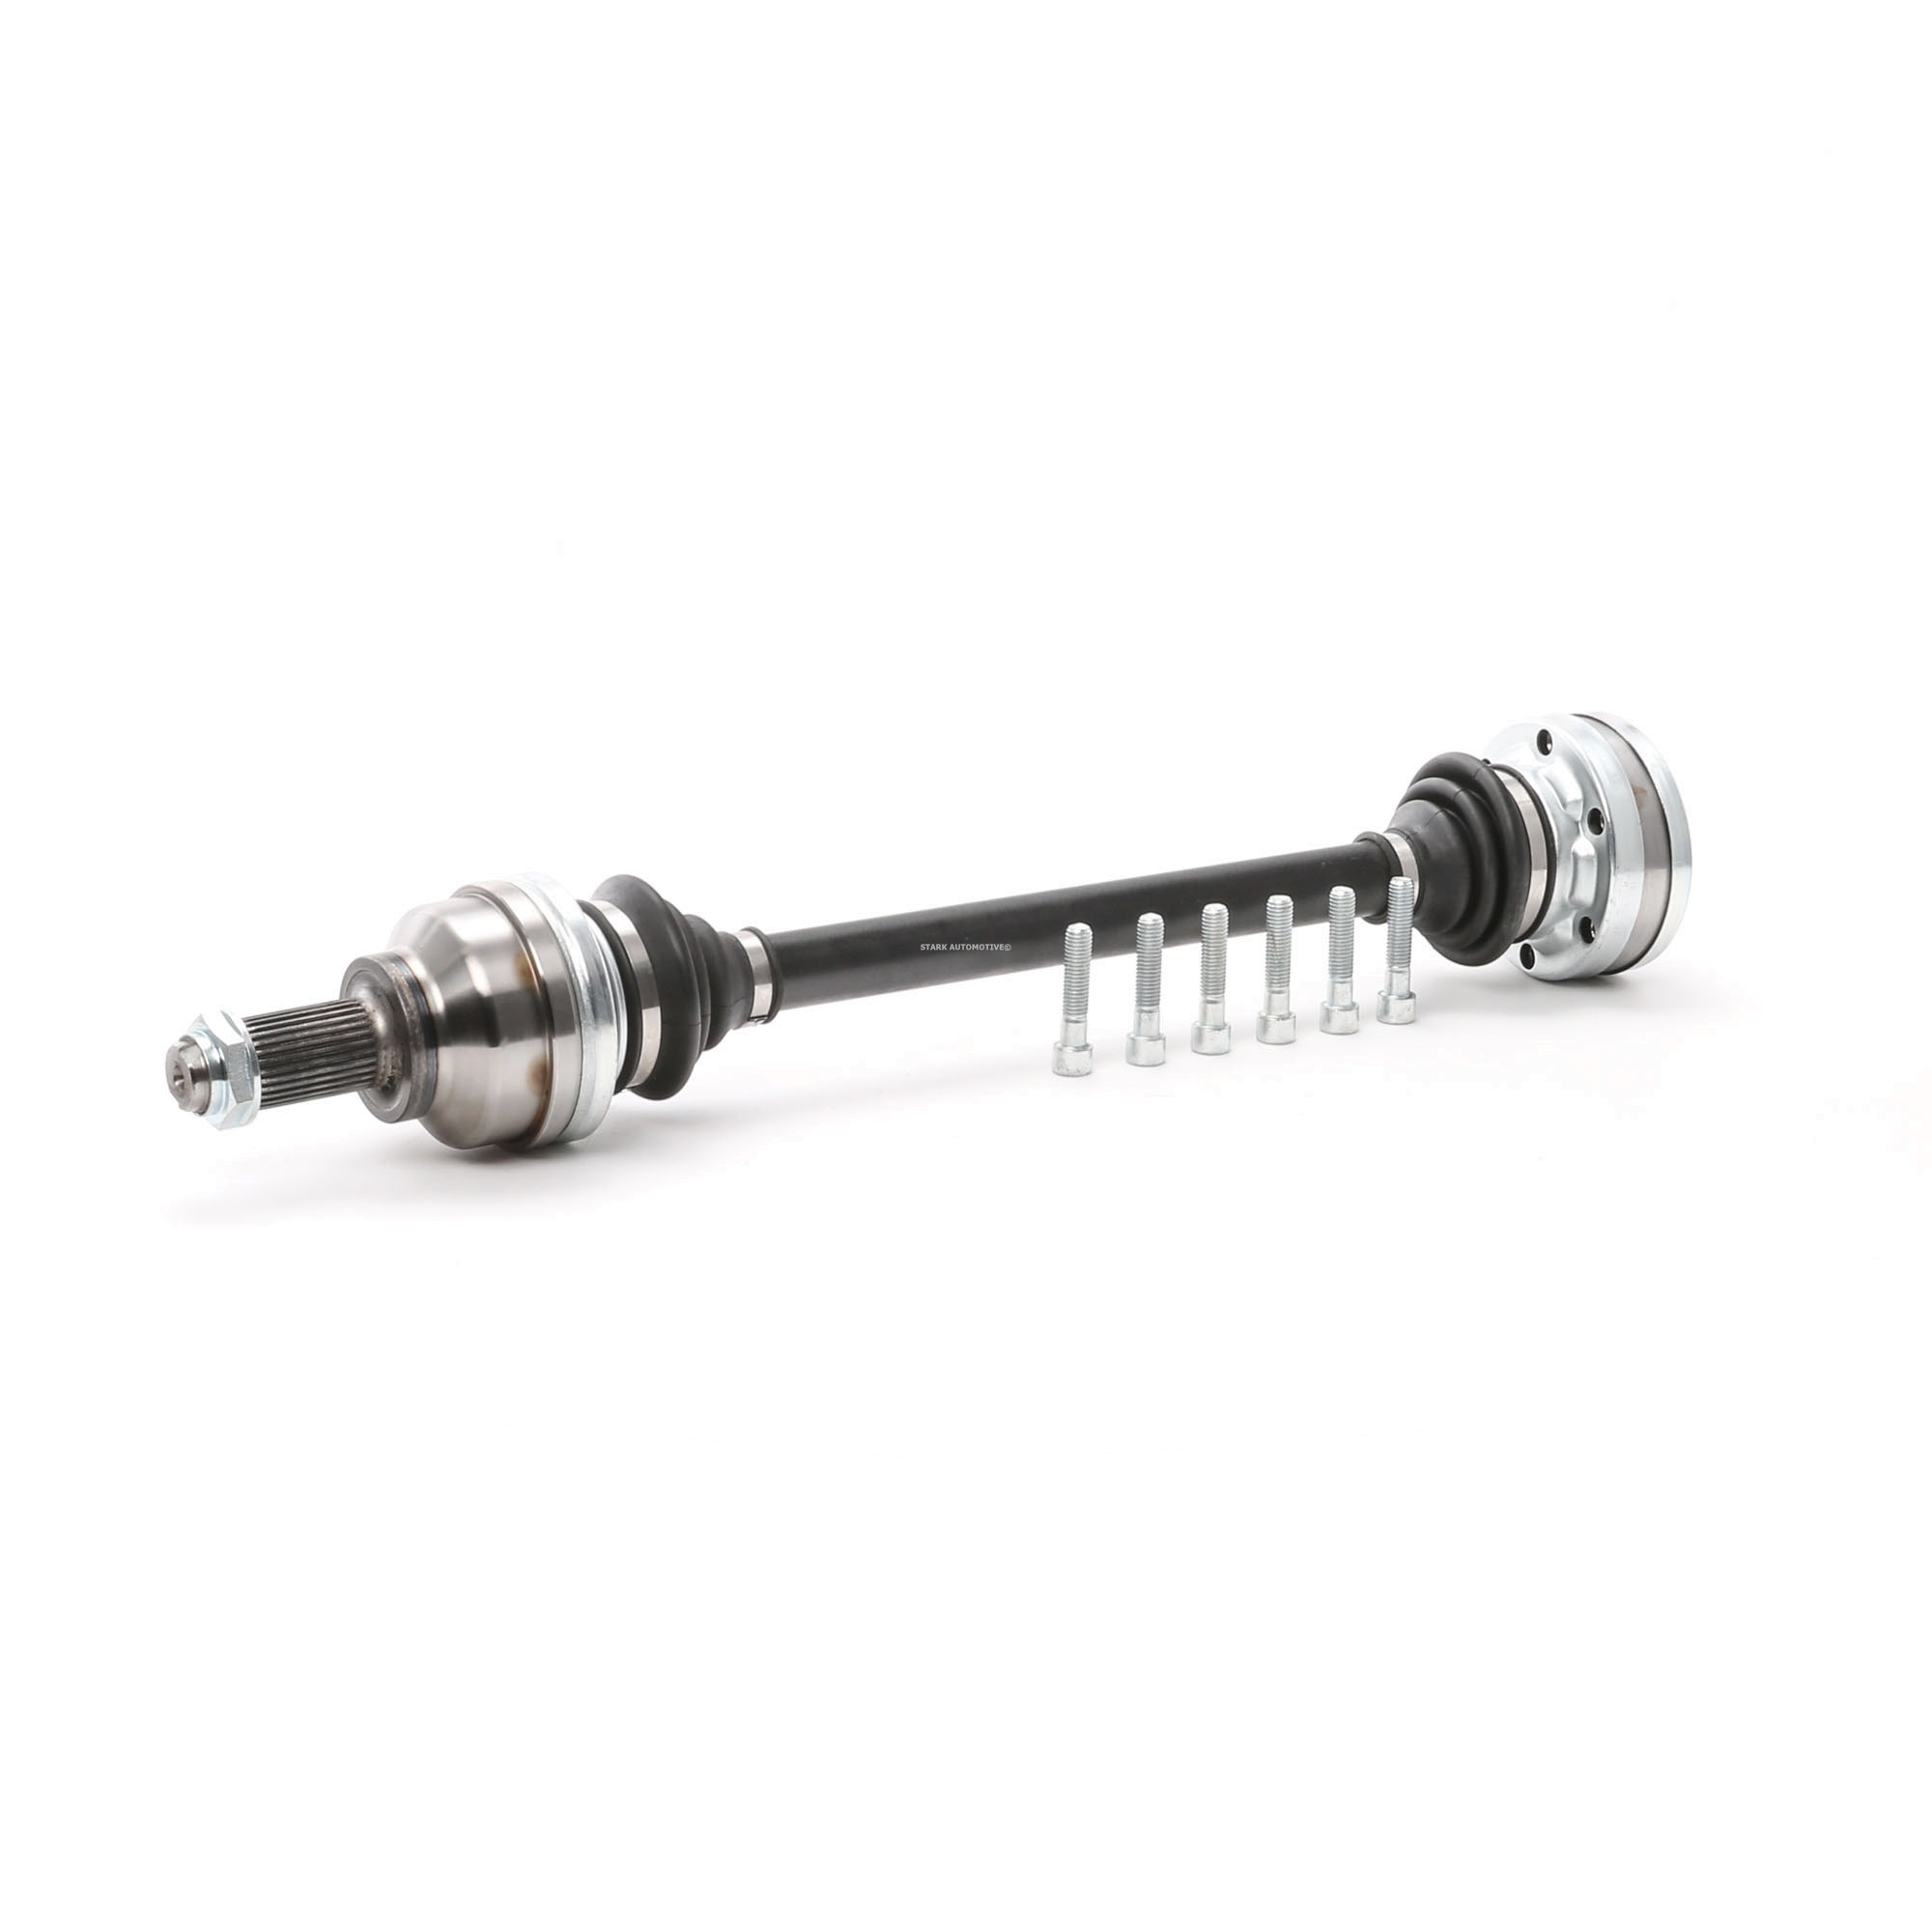 STARK SKDS-0210054 Drive shaft Rear Axle both sides, 628mm, 90mm